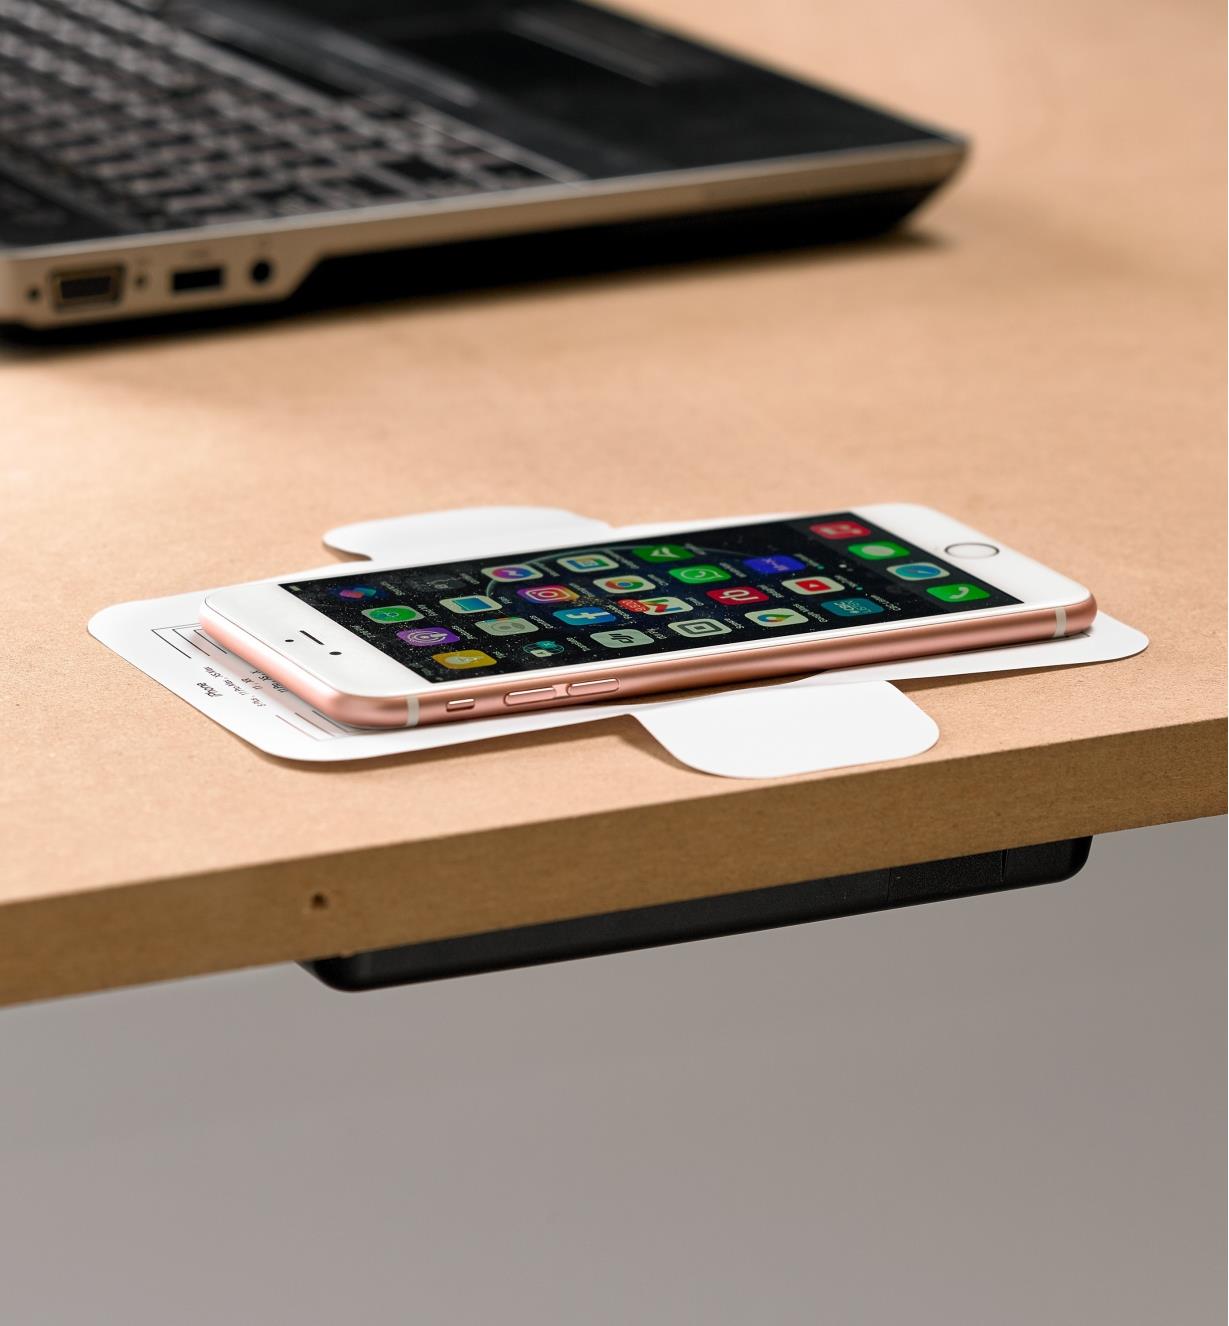 A calibration template guides phone placement on the surface above the wireless charger